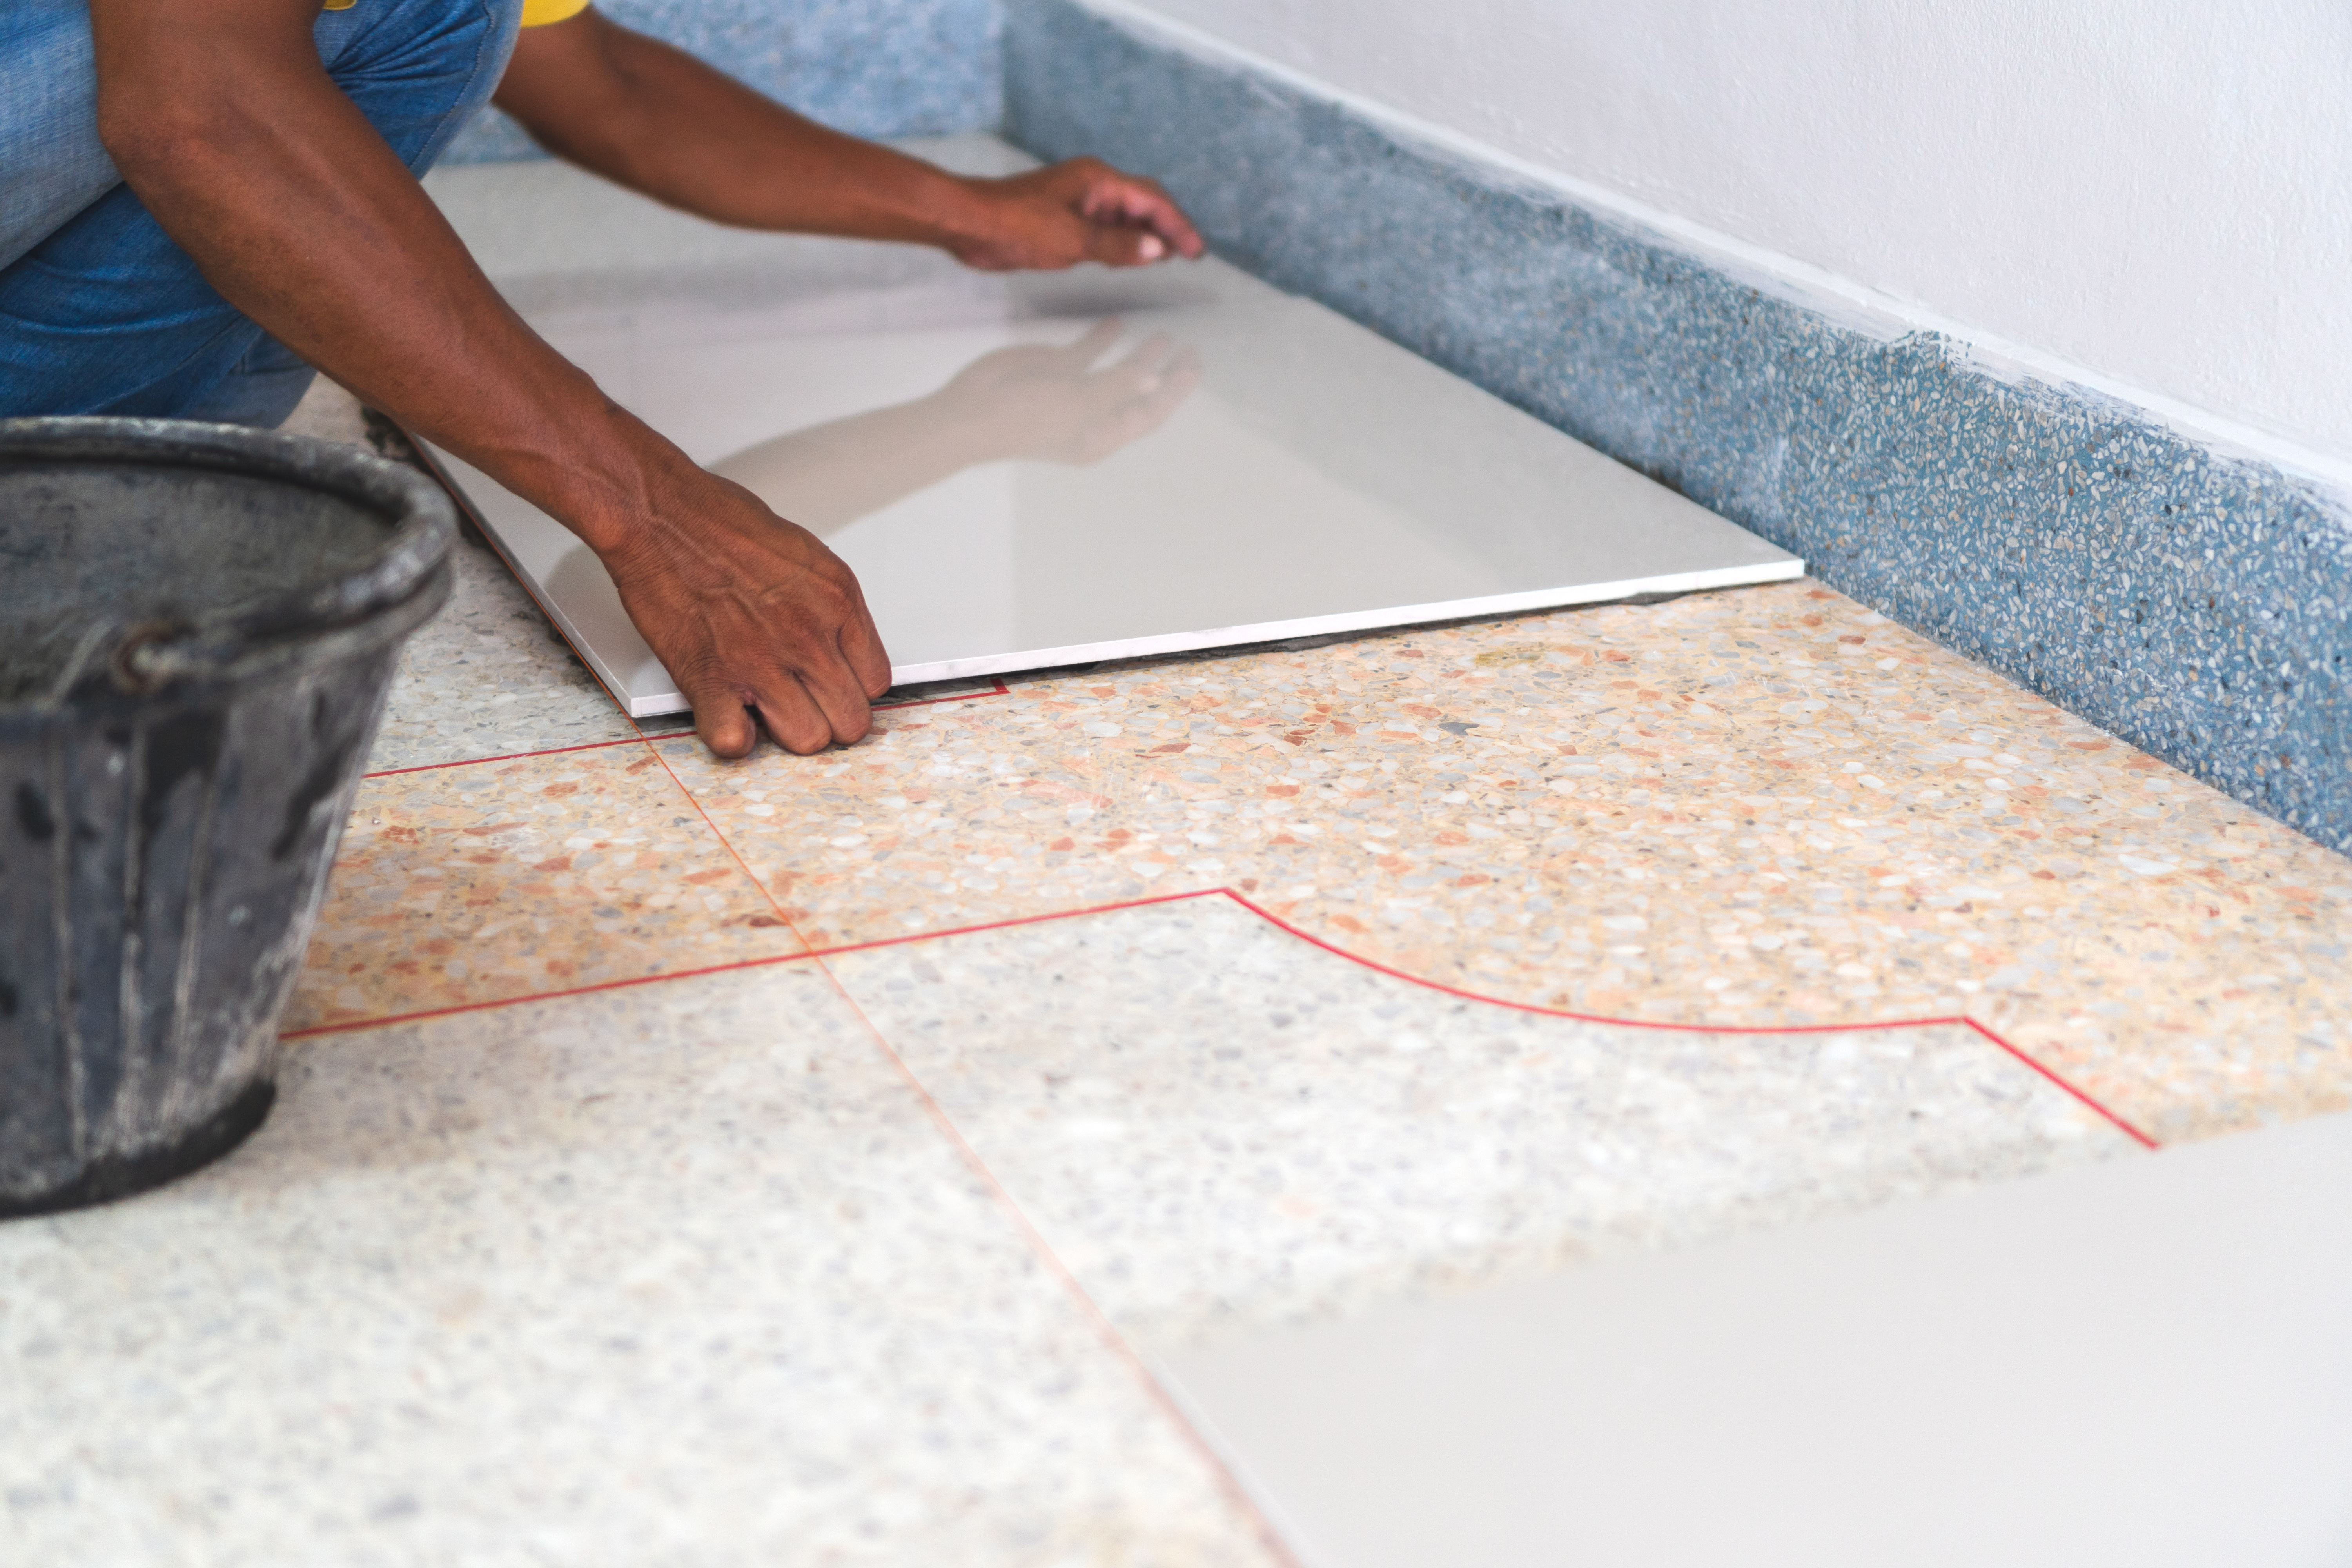 Water Damage to Tile Flooring – How It Can Be Prevented [Quick Tips]